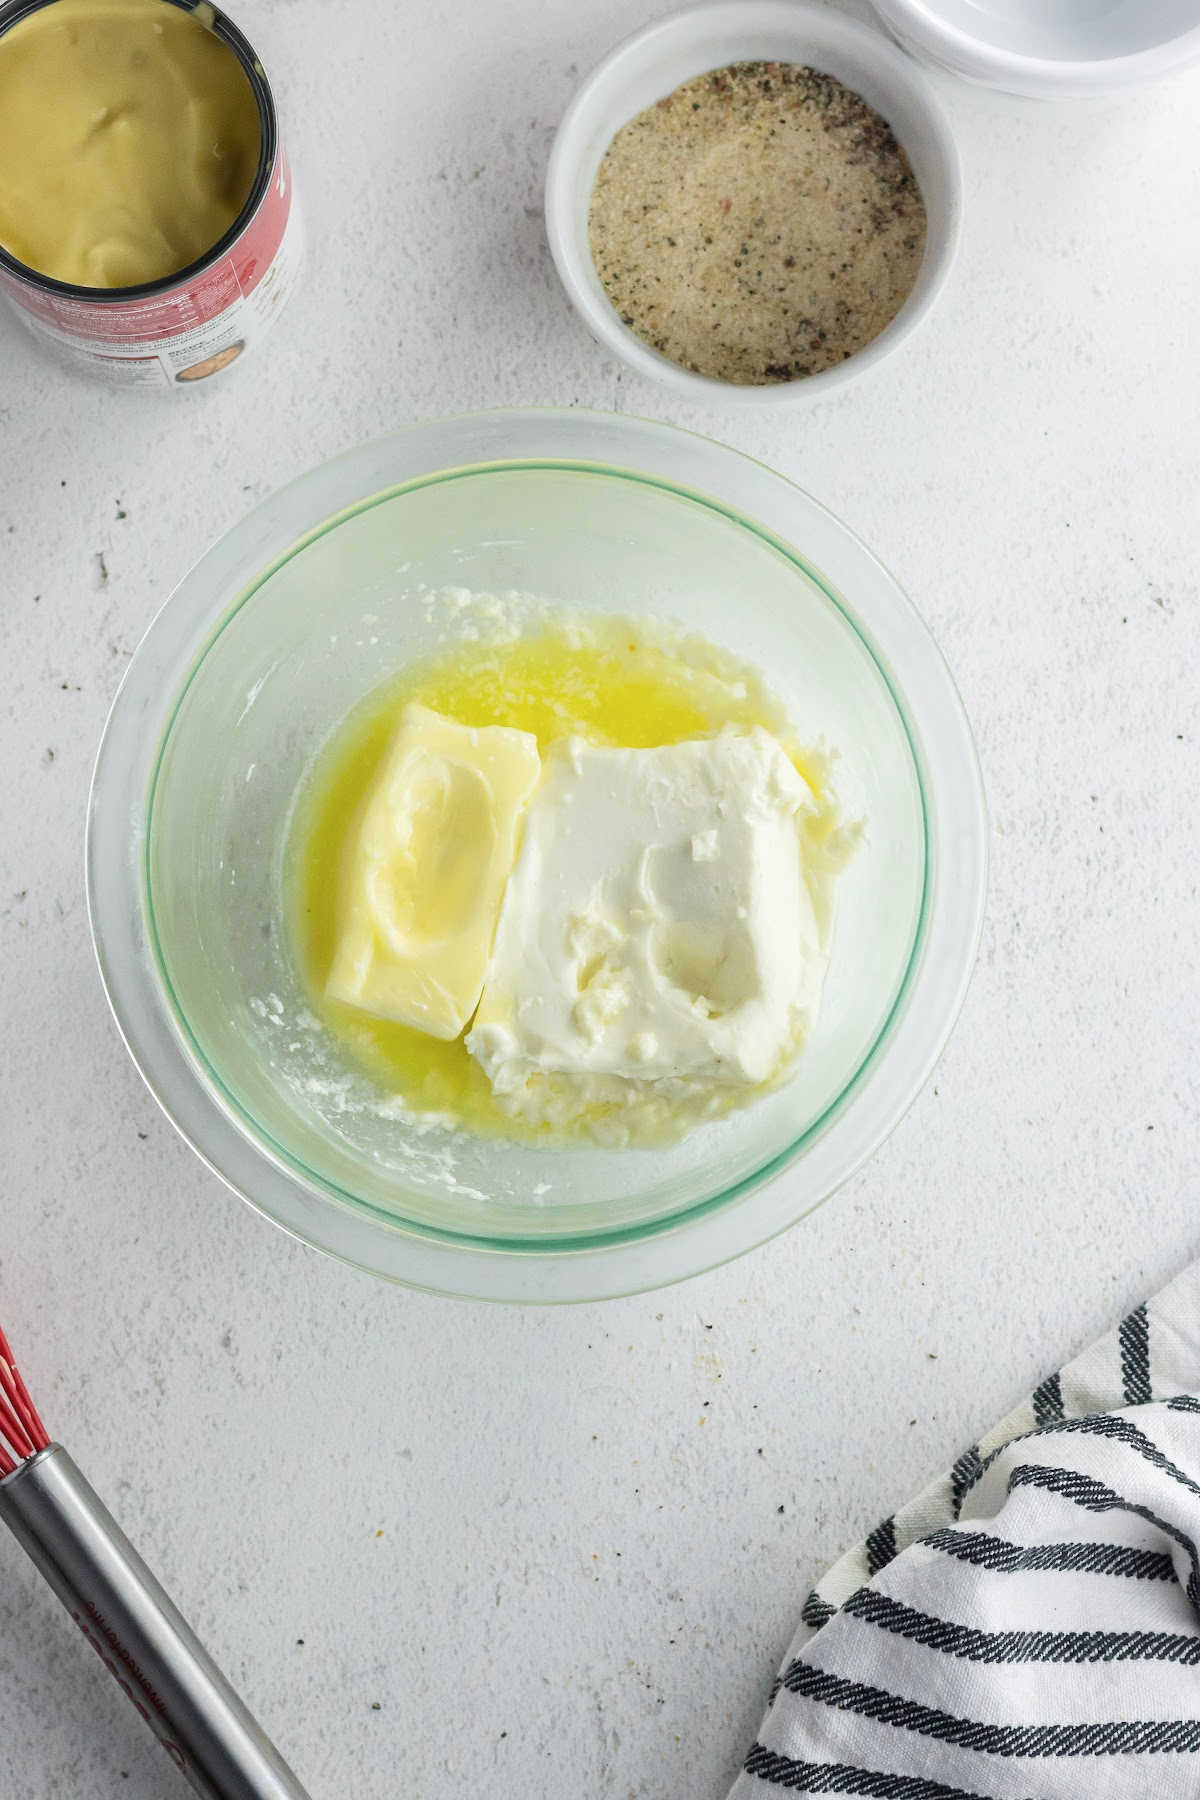 Soften butter and cream cheese.